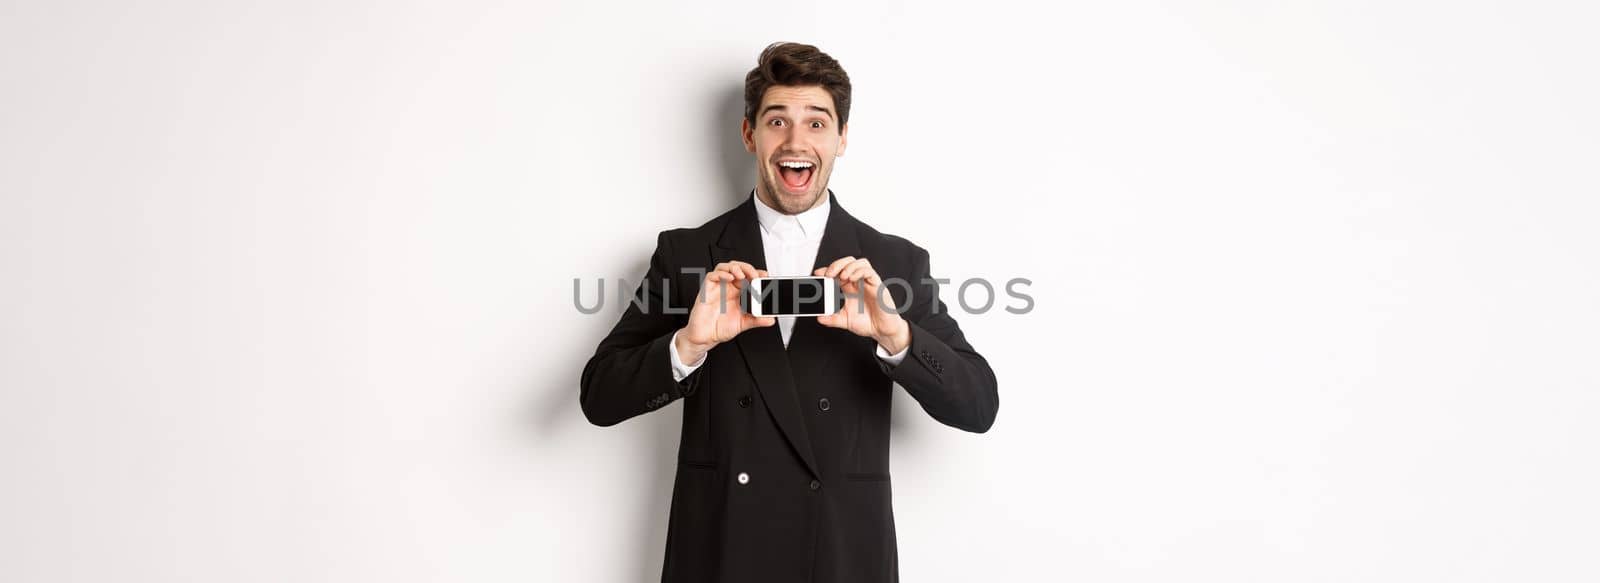 Image of cheerful, handsome man in black suit, showing smarthone screen and looking amazed, standing against white background.